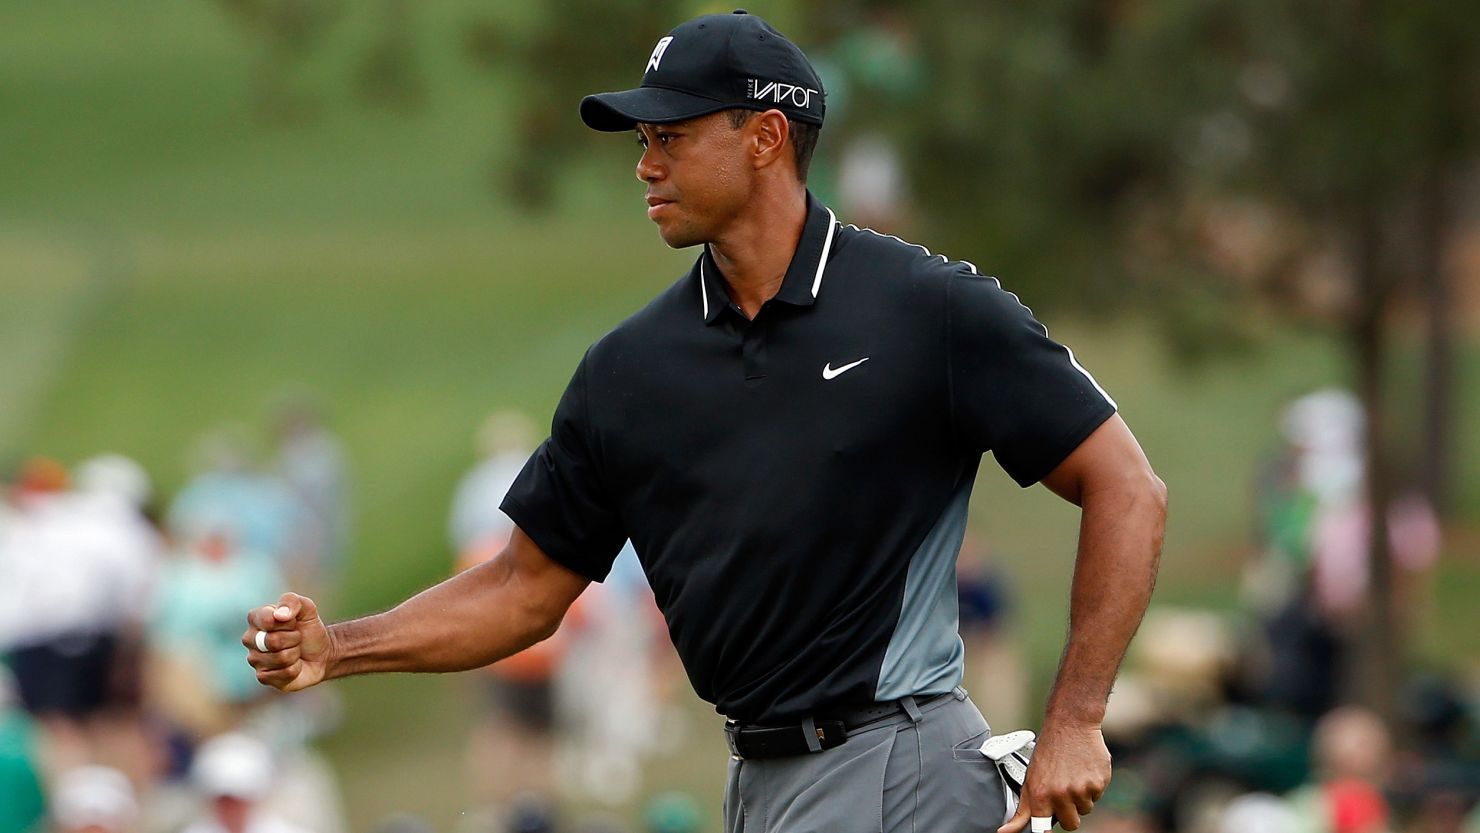 Tiger Woods has set his return to golf for next week's Safeway Open.